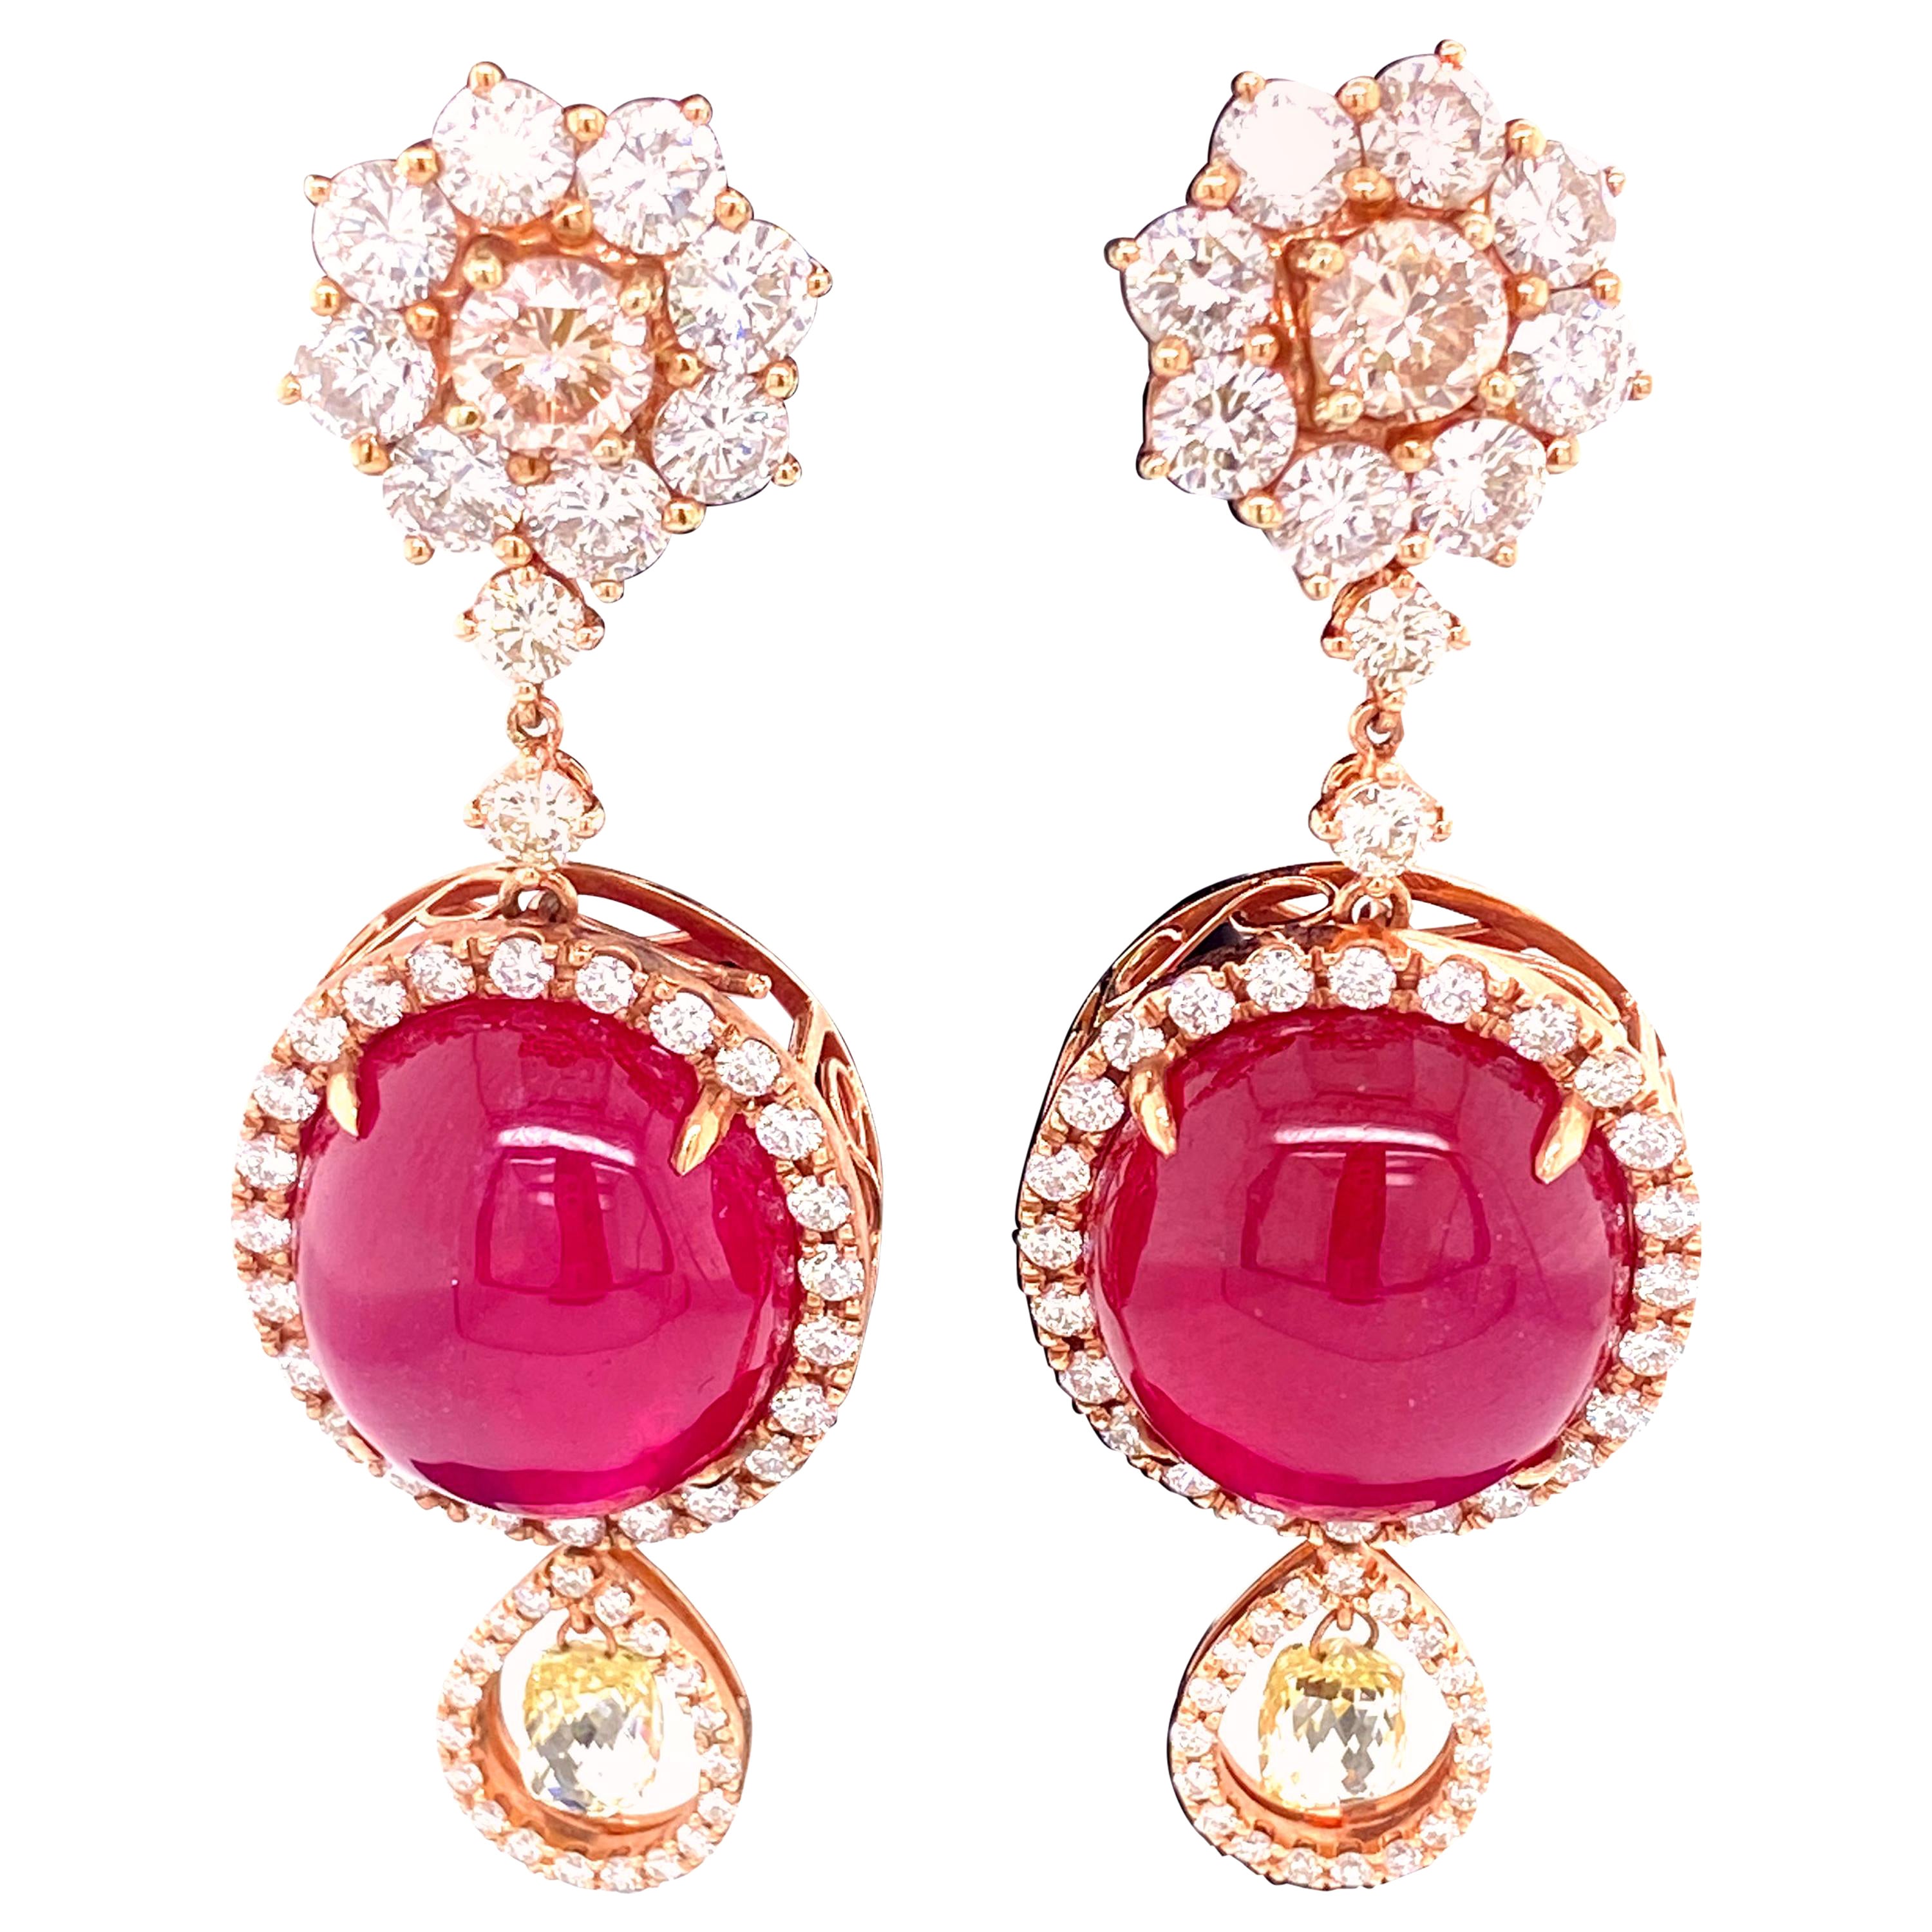 42.02 Carat Ruby Cabochon, Pink Diamond, and Diamond Briolette Gold Earrings For Sale